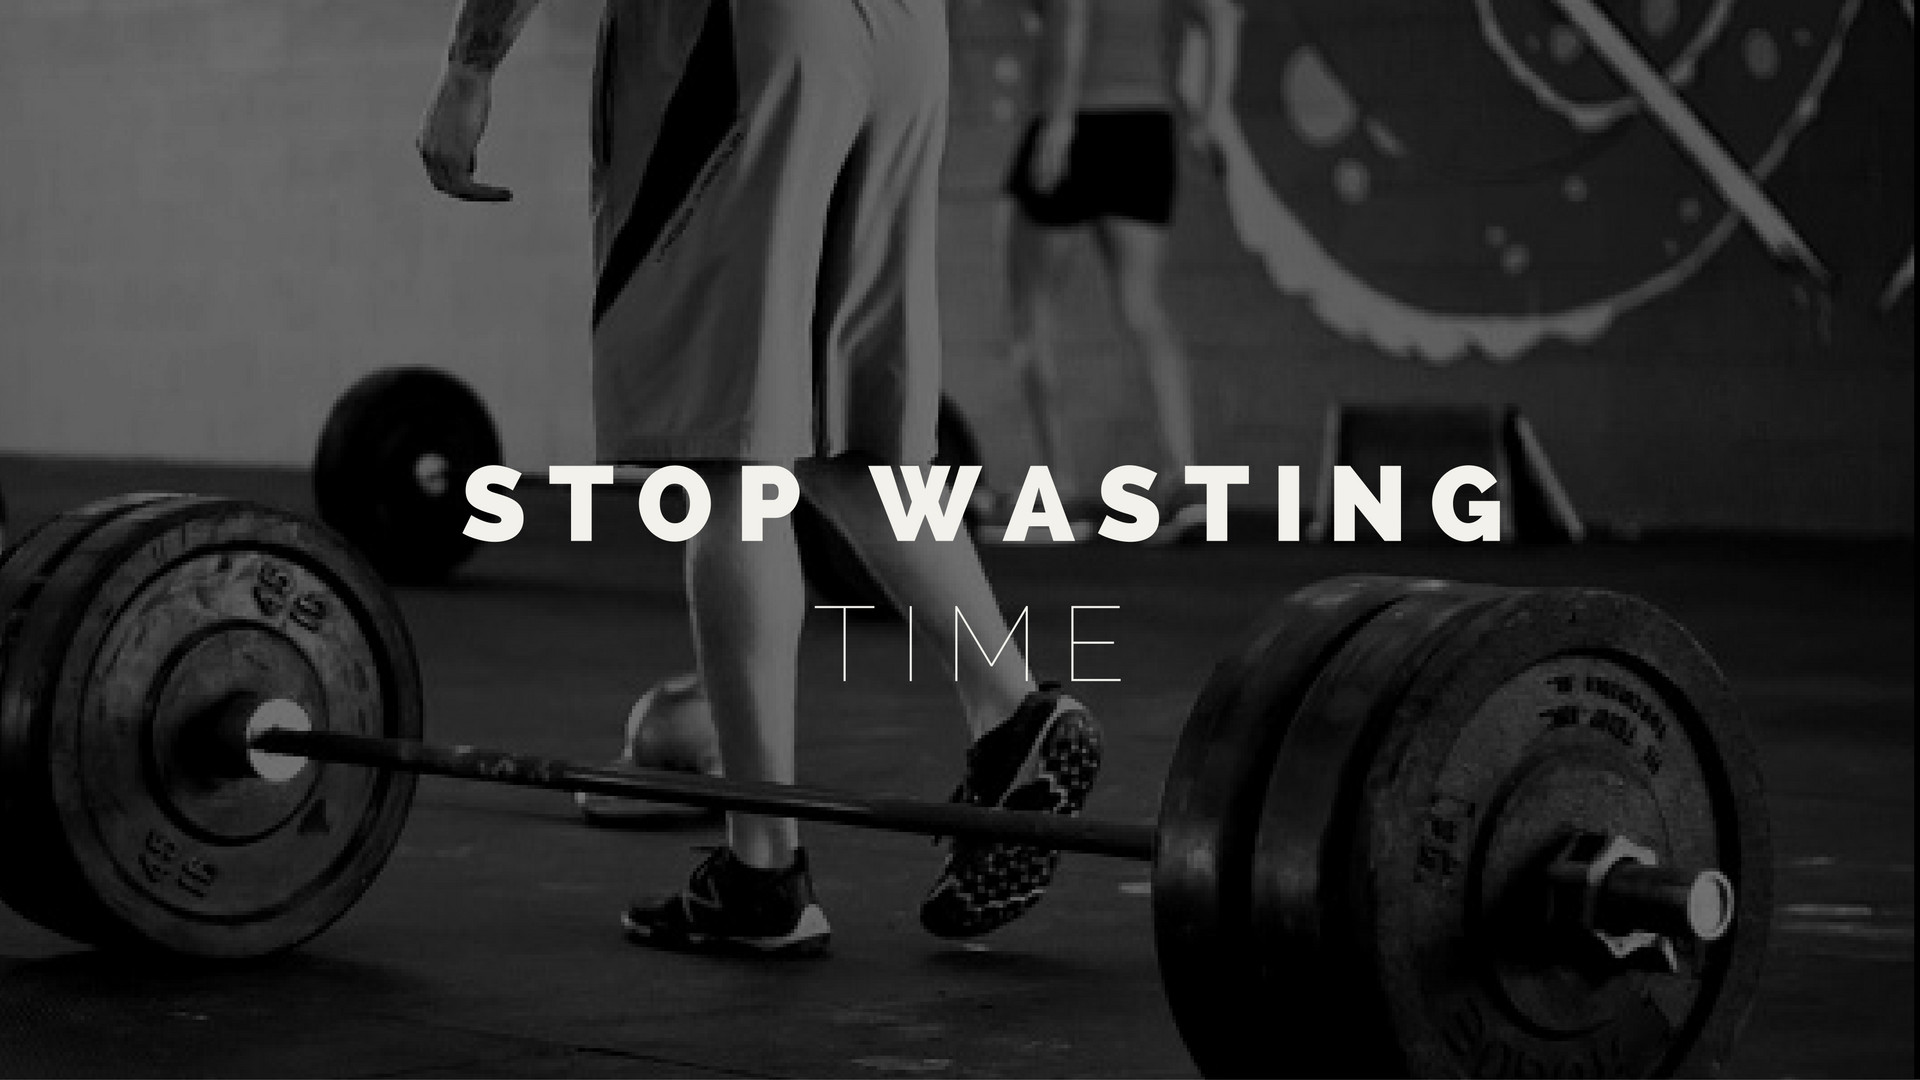 1920x1080 4 Training Strategies to Stop Wasting Time in the Gym